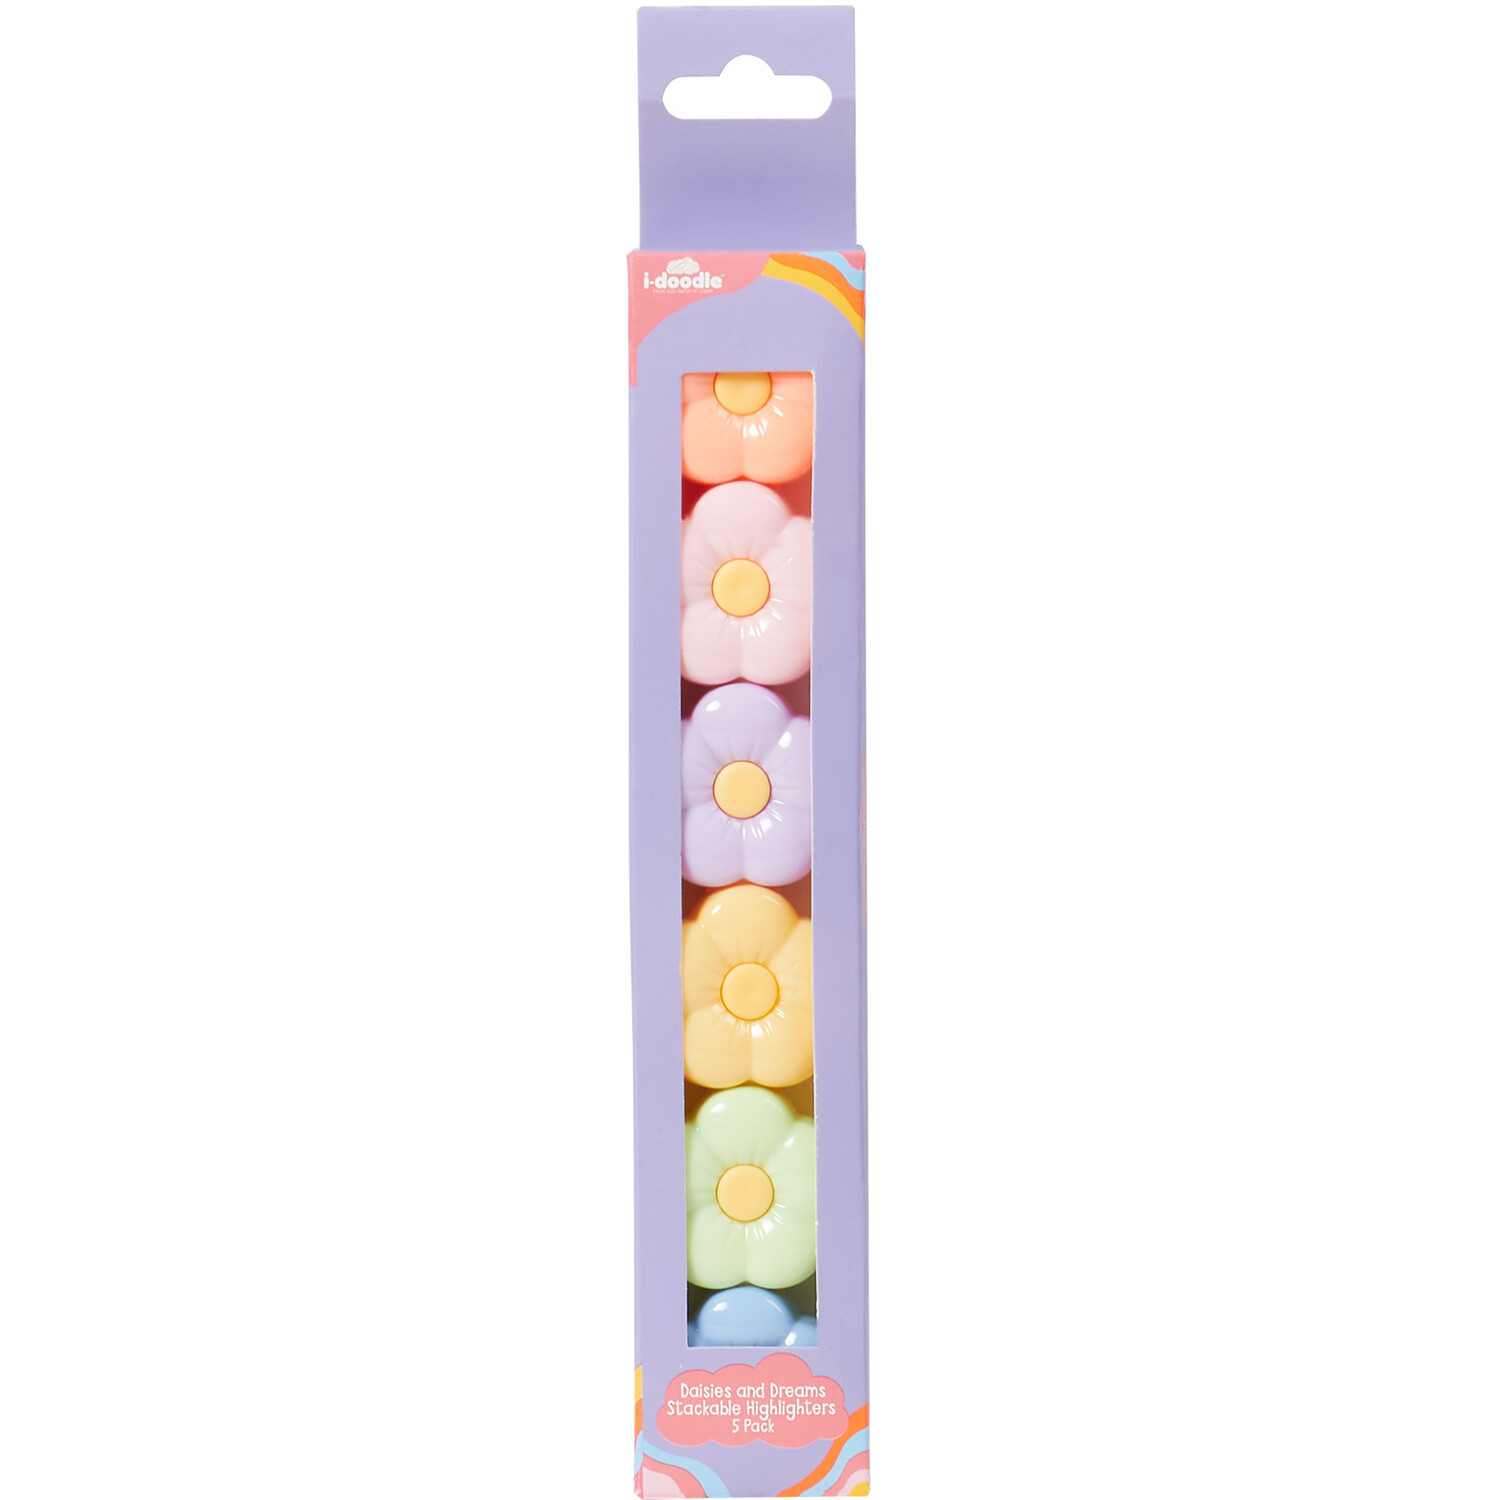 i-doodle Daisies and Dreams Stackable Highlighter 6 Pack Image 1